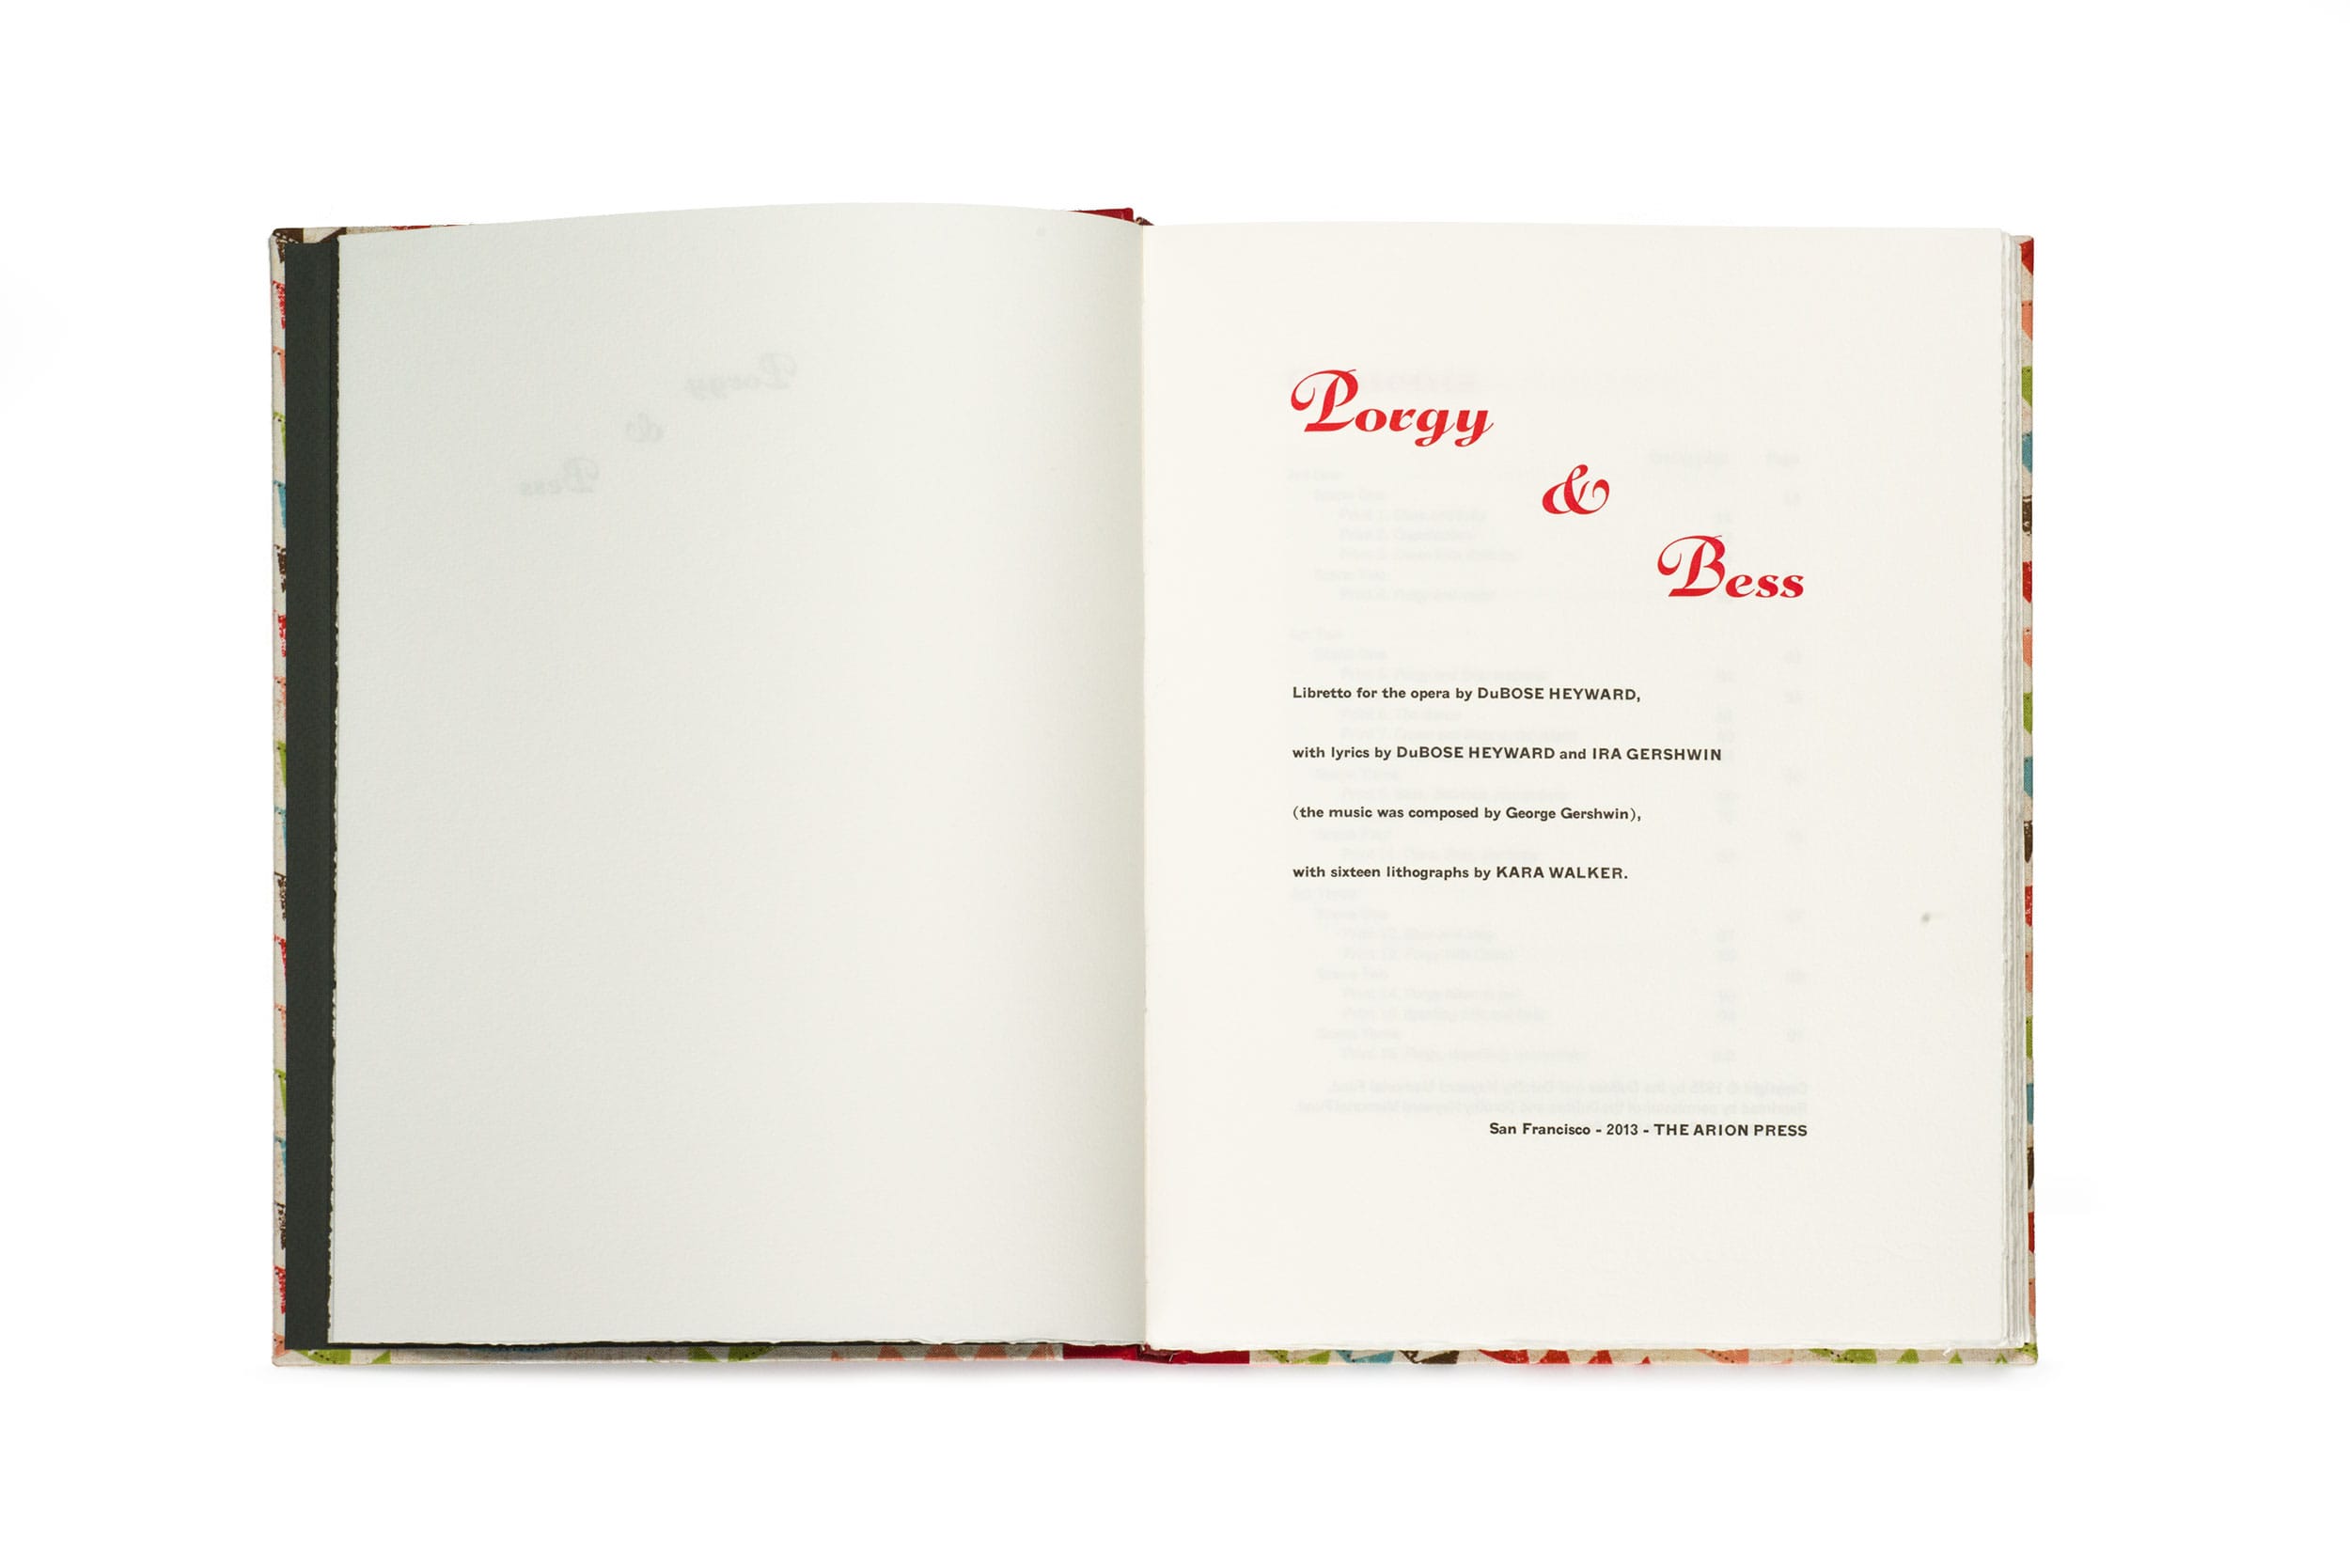 Porgy & Bess libretto by DuBose Heyward and Ira Gershwin with 16 lithographs by Kara Walker.